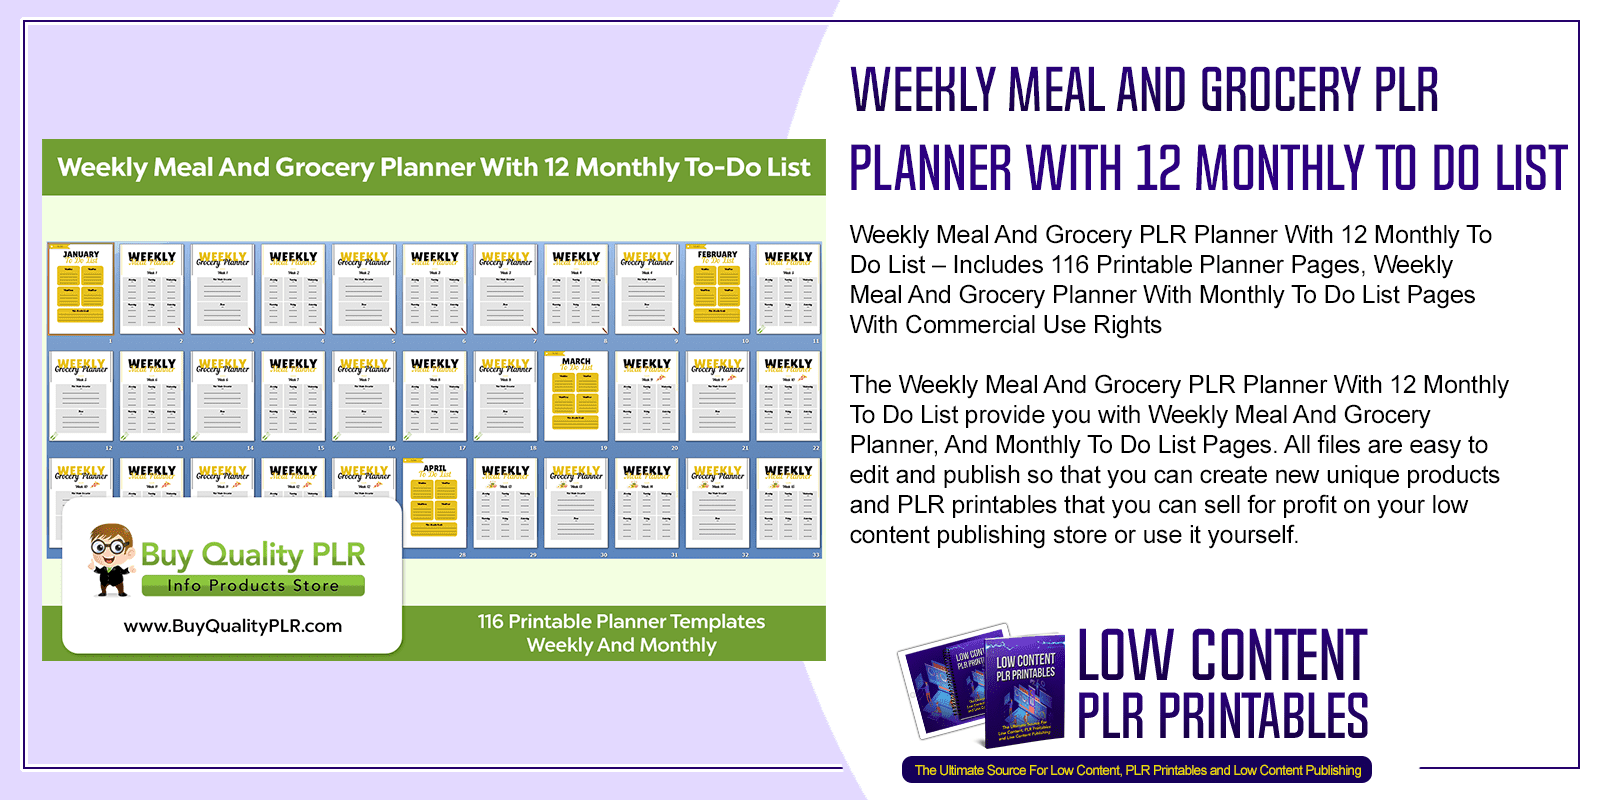 Weekly Meal And Grocery PLR Planner With 12 Monthly To Do List